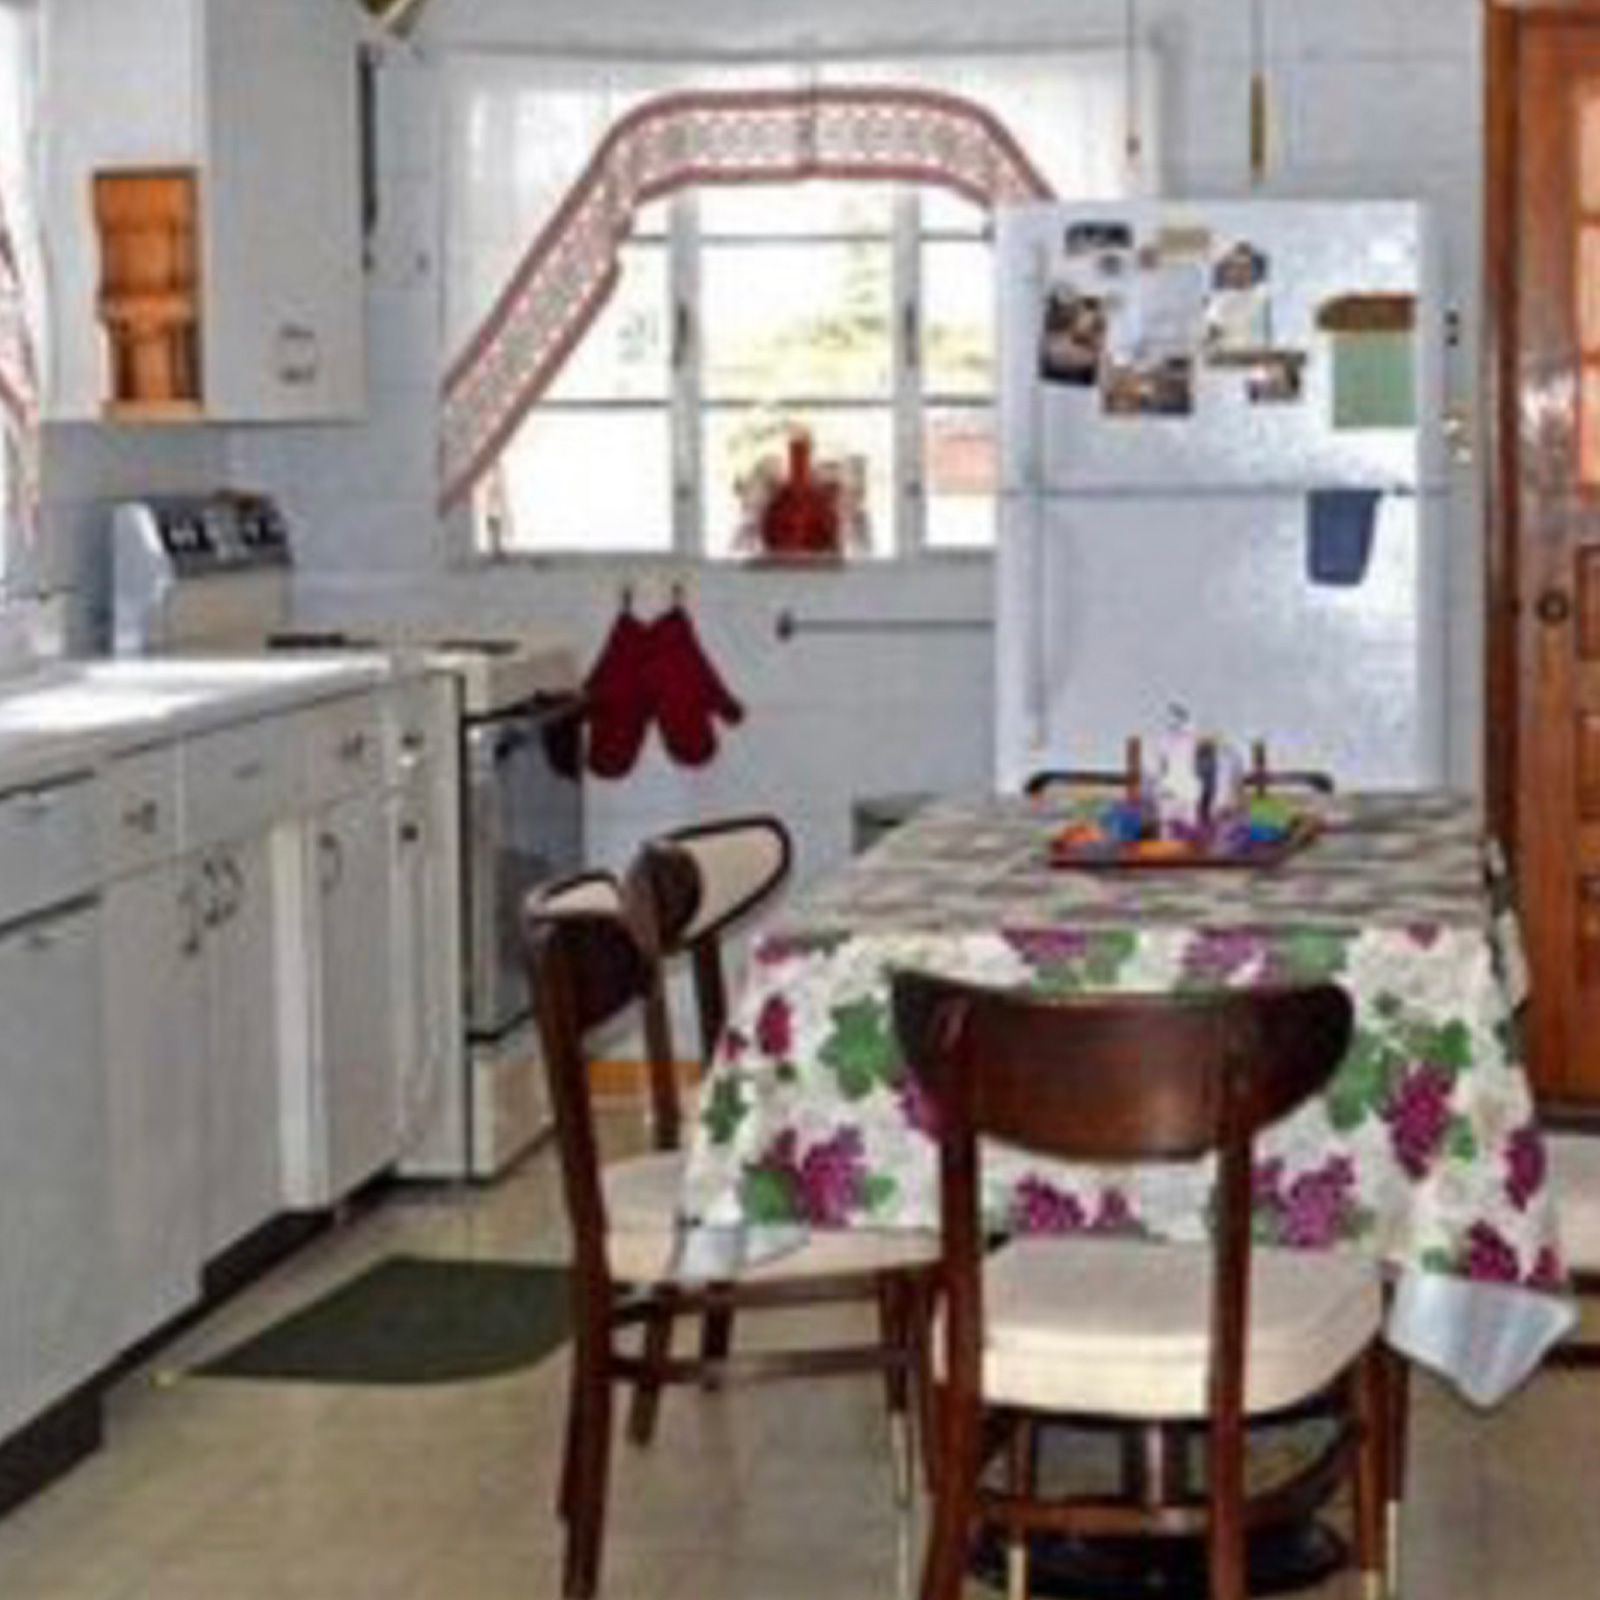 This oldfangled kitchen needs a redesign